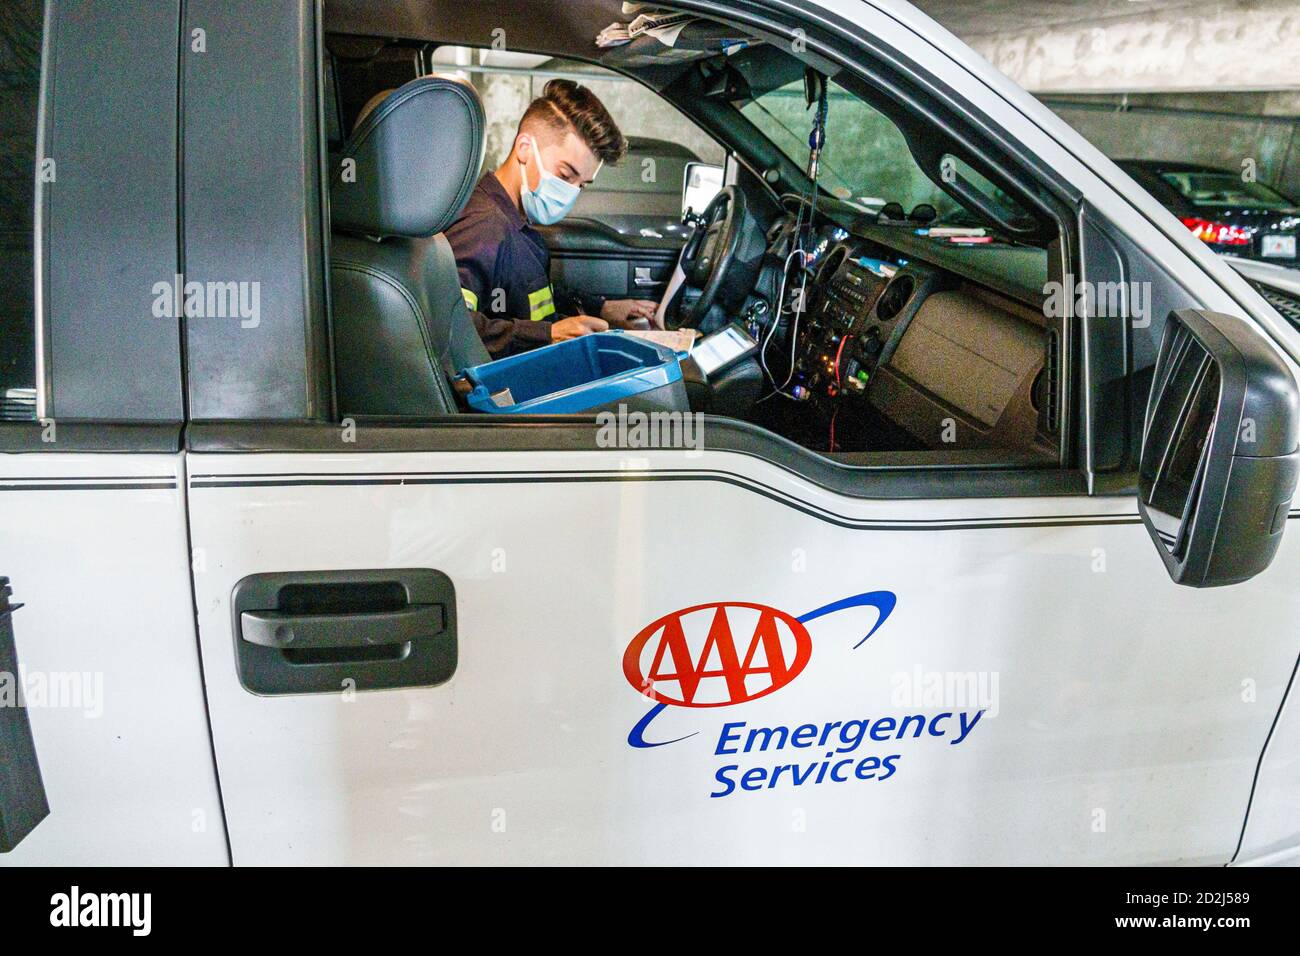 Miami Beach Florida,AAA American automobile Association Emergency Services,Hispanic Latin Latino ethniquement immigrants minorités,homme,Covid-19 co Banque D'Images